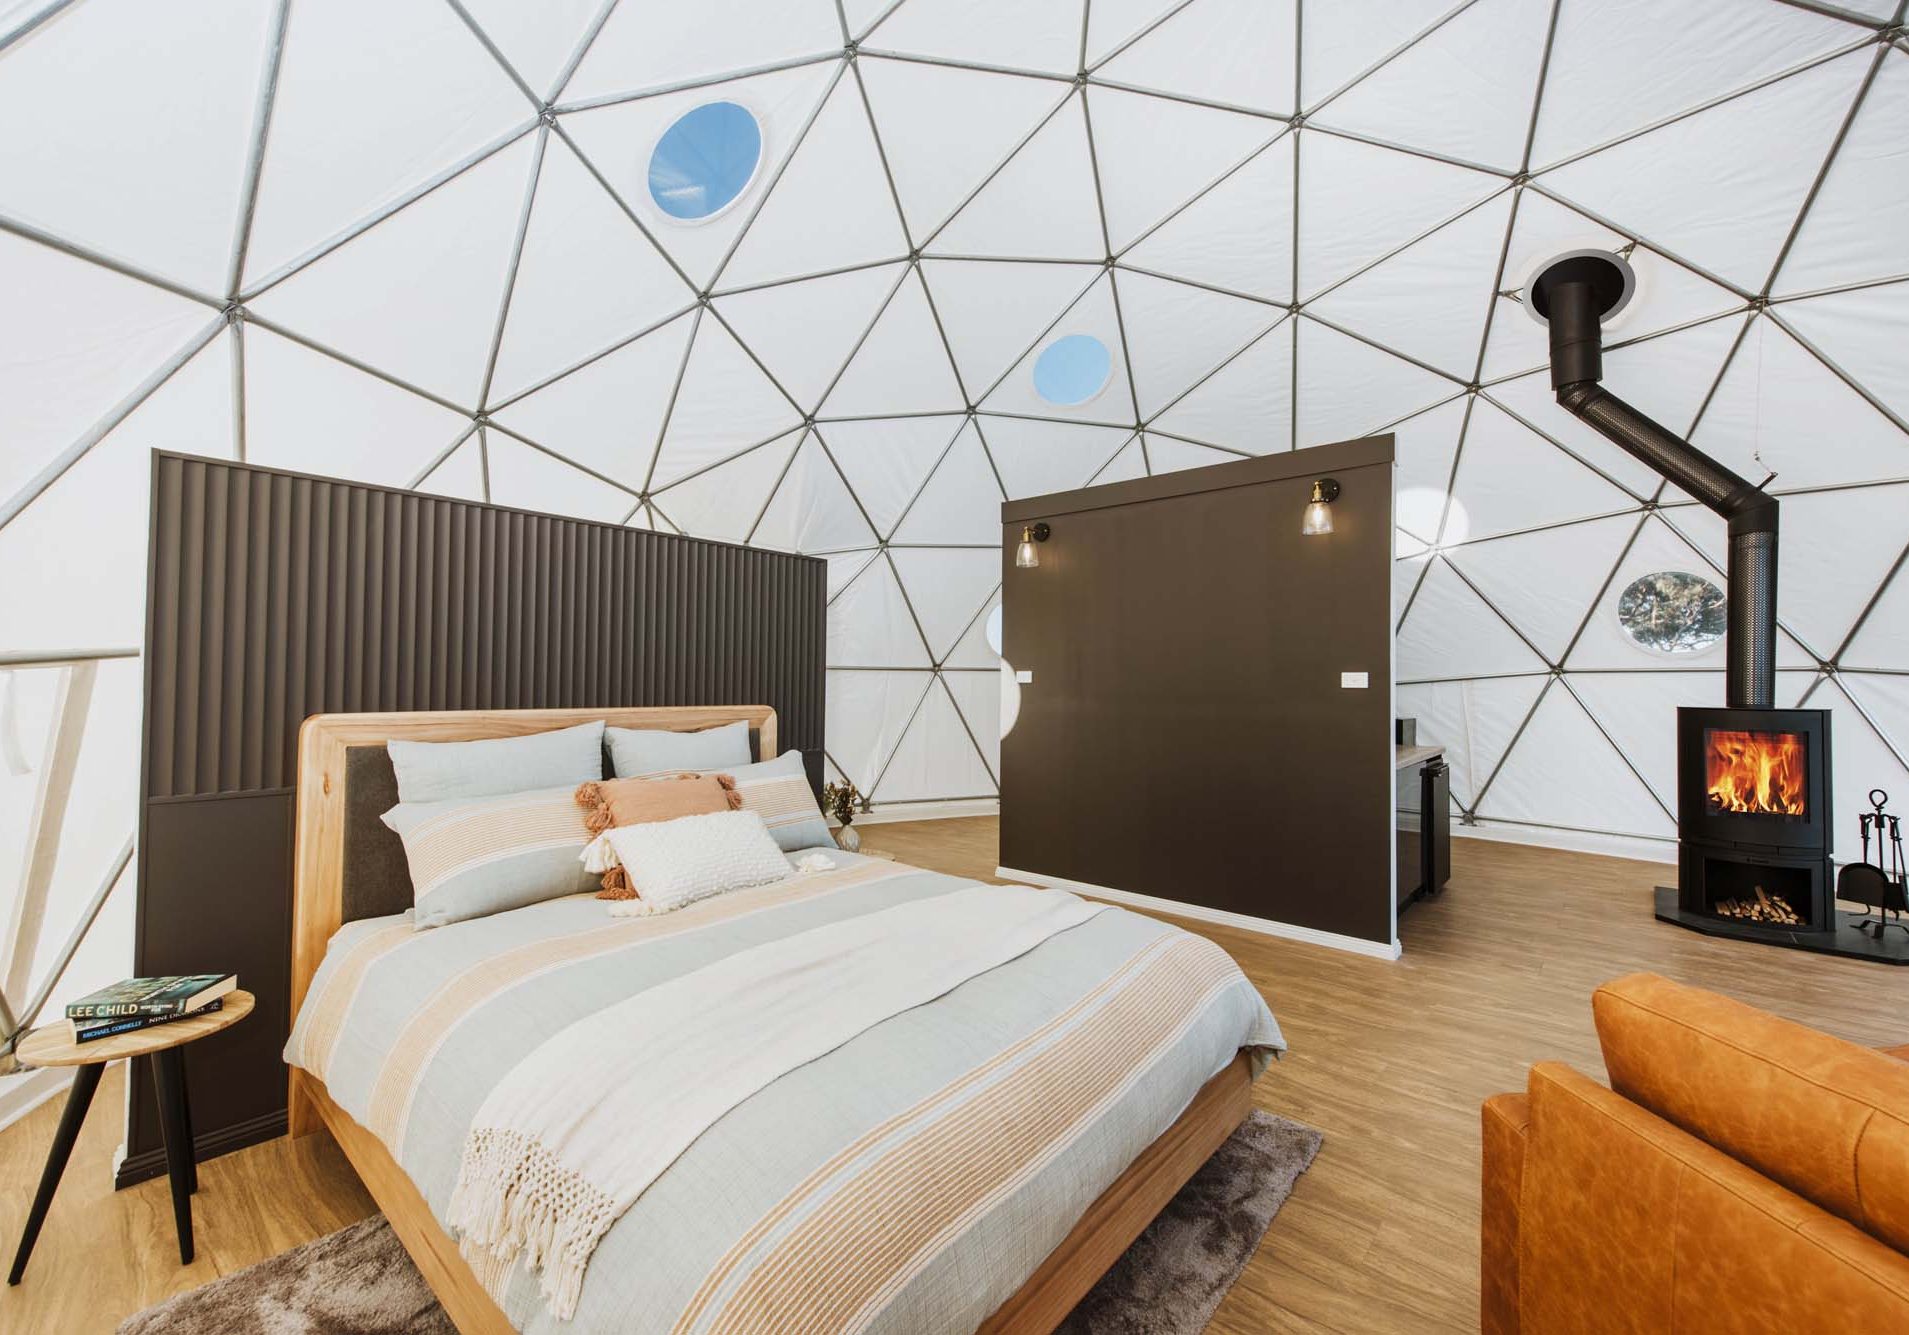 Bed inside the Hideaway Domes accommodation